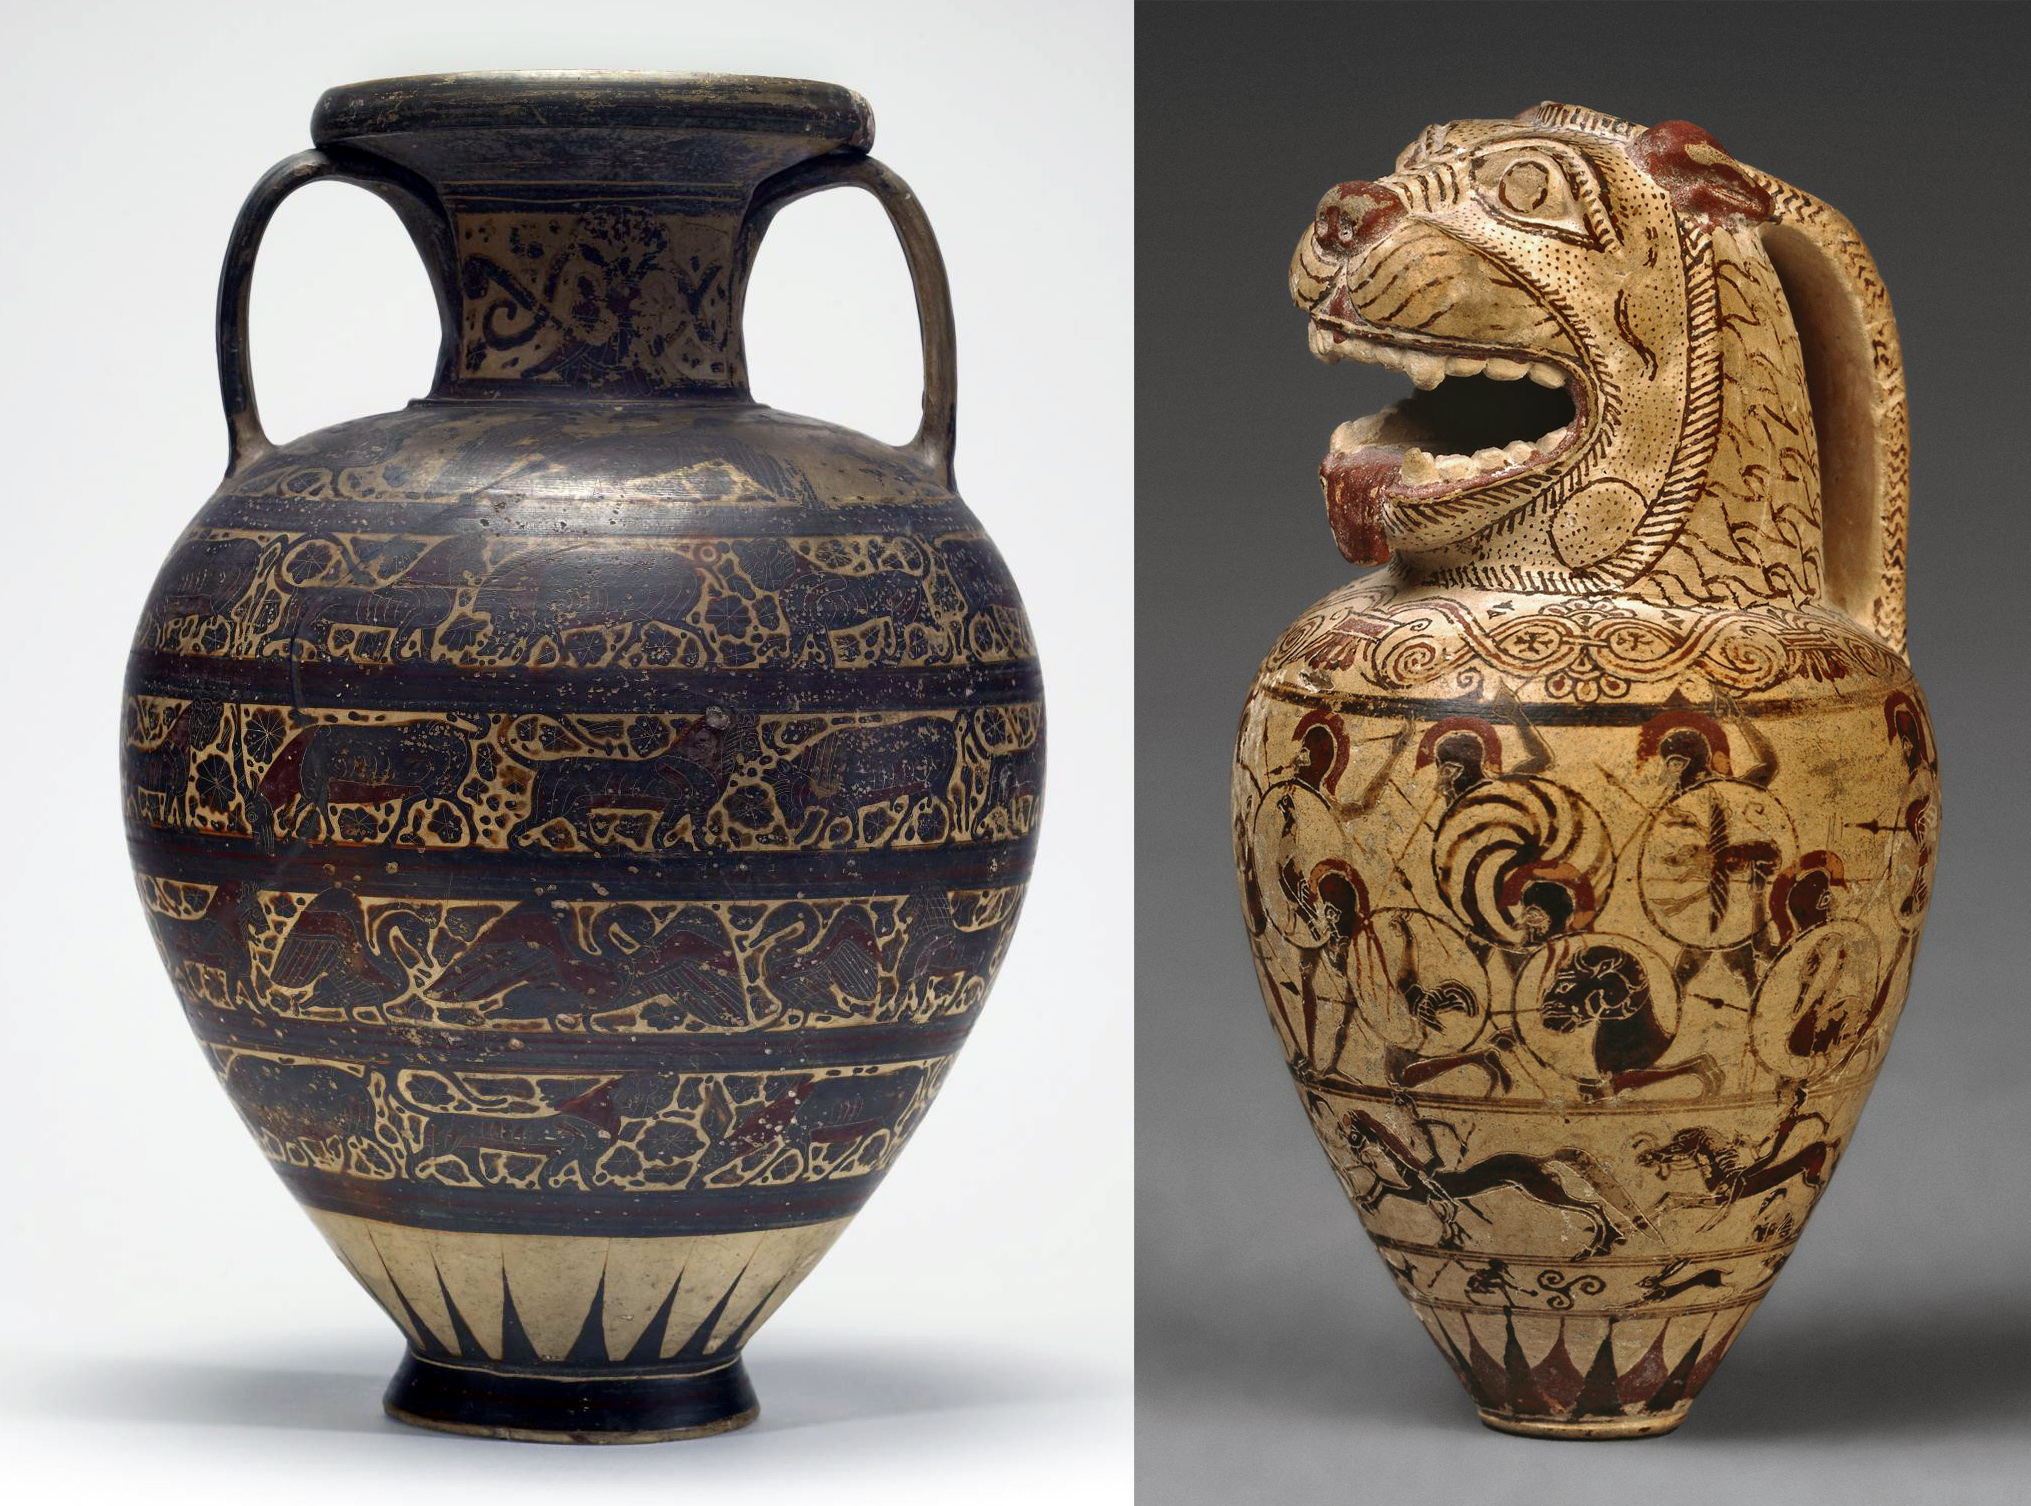 Left: Amphora with Animal Frieze, late 7th century BCE (Orientalizing), terracotta, wheel made; Corinthian ware, made in Corinth, Greece, 44.4 x 30 cm (The Walters Museum); right: aryballos, attributed to the Chigi Painter, c. 640 B.C.E, terracotta, made in Corinth, Greece, 3.9 diameter, 6.9 cm high (© Trustees of the British Museum)